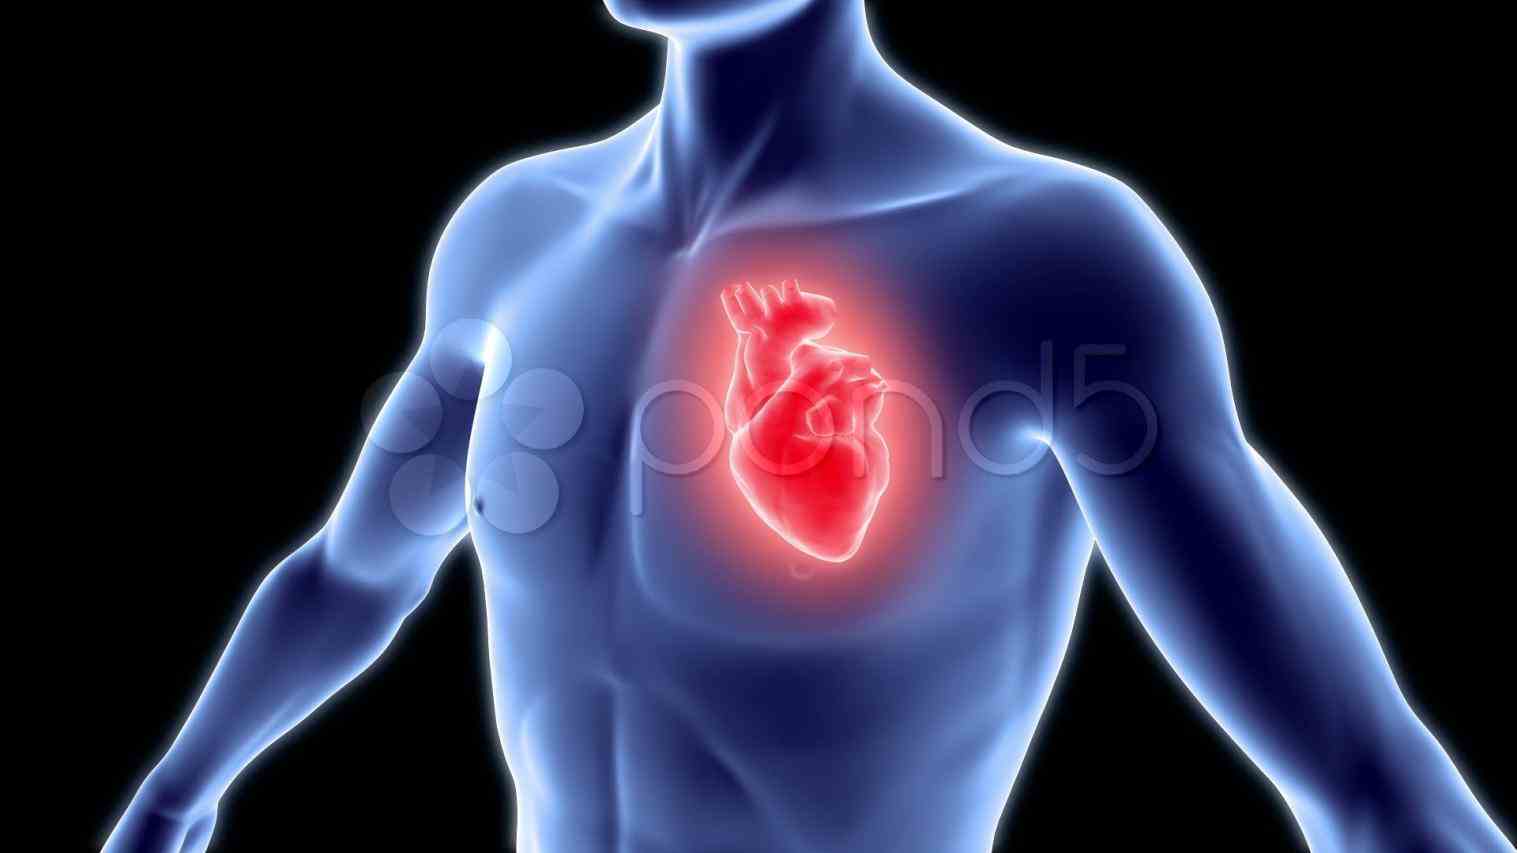 Other Picture of Image Of Heart In Human Body.